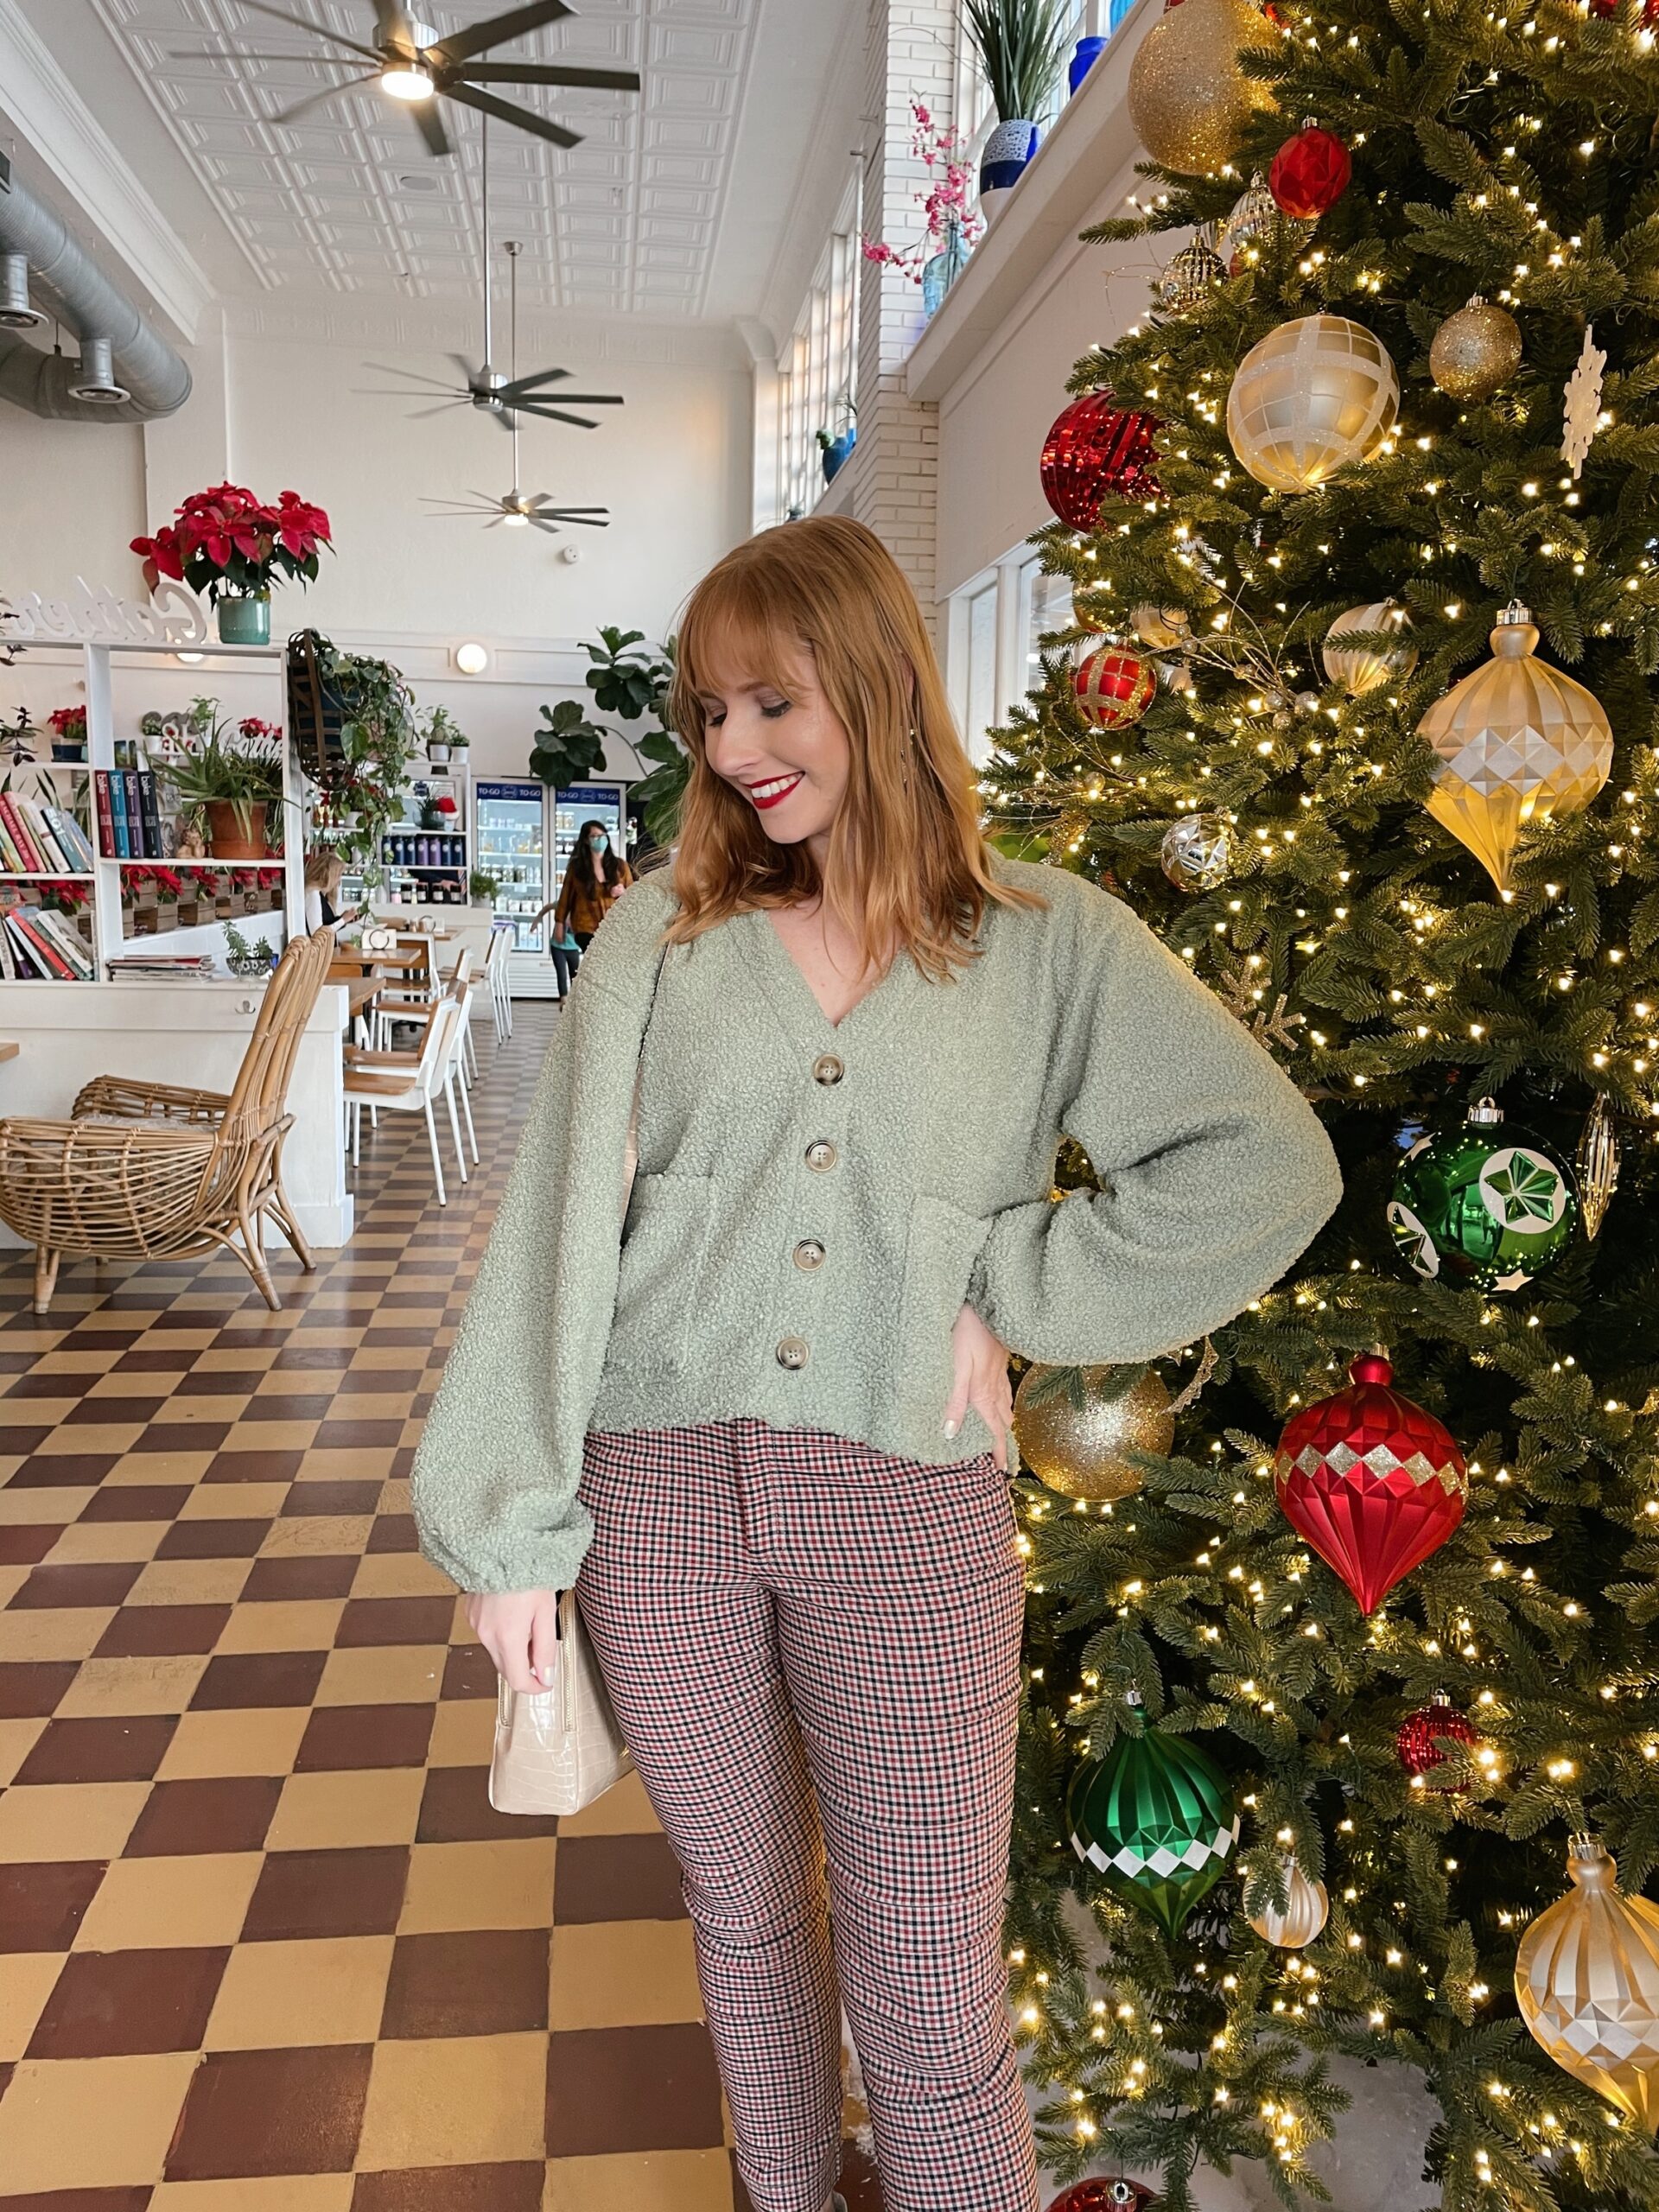 6 Easy Holiday Fashion Trends to Try This Season Affordable by Amanda